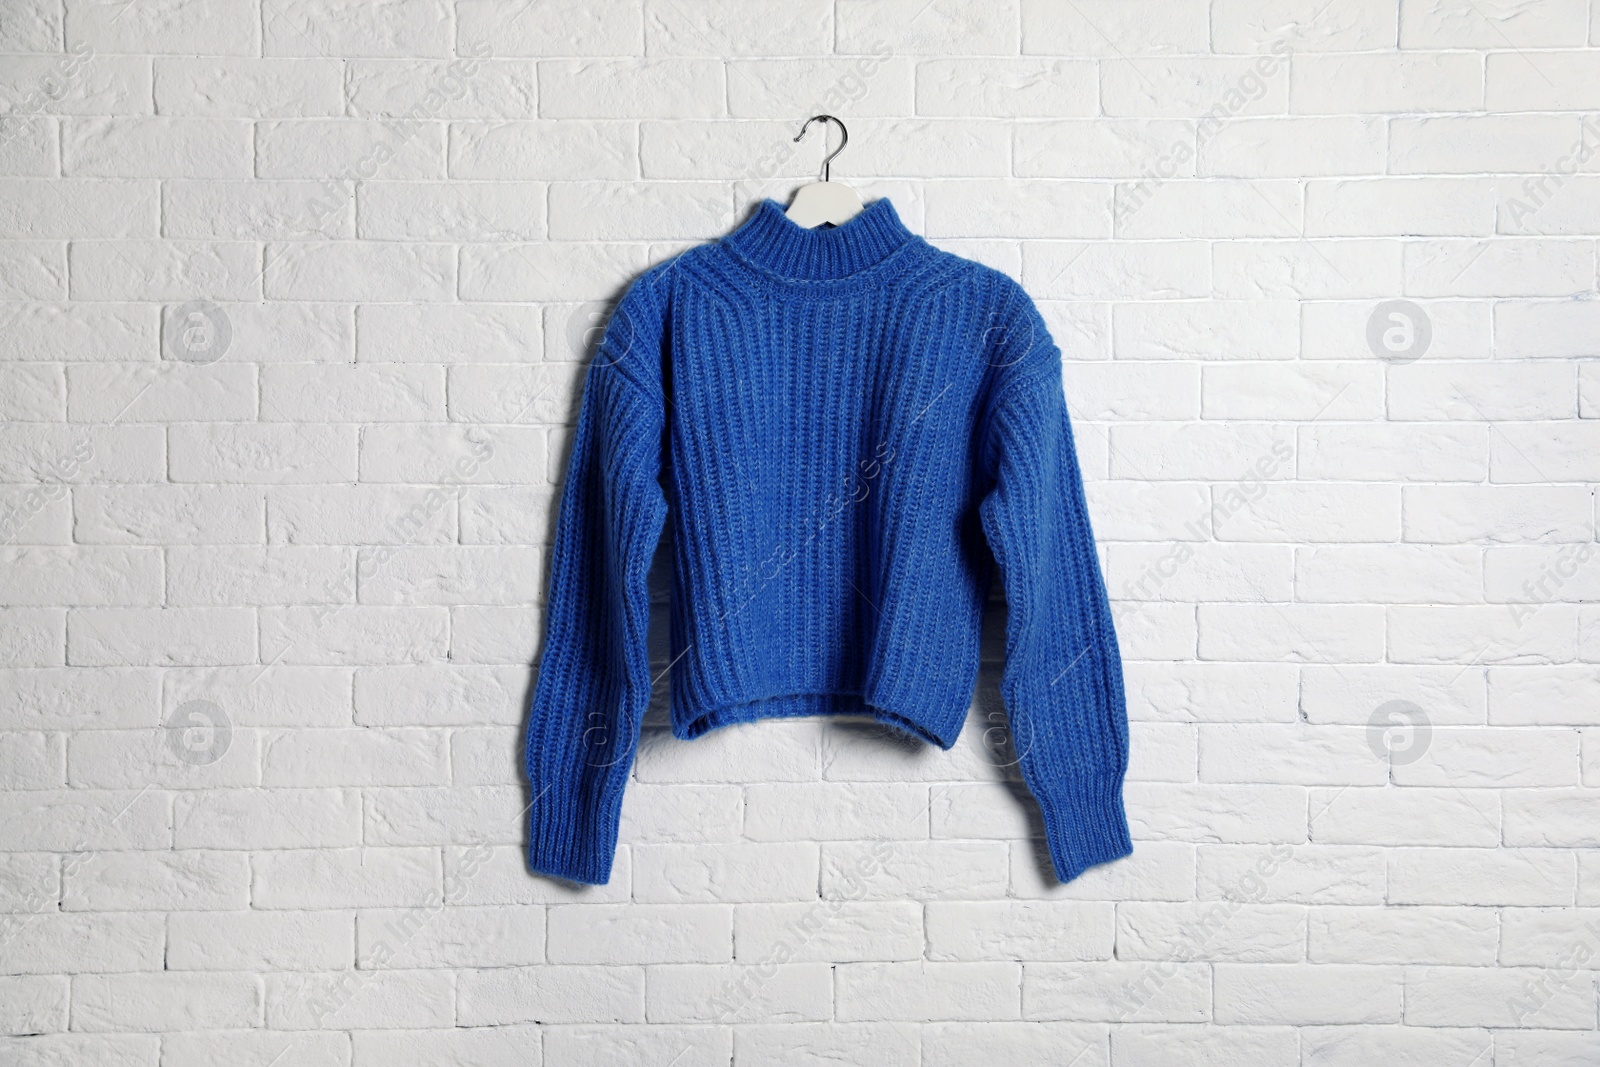 Photo of Hanger with stylish sweater on brick wall